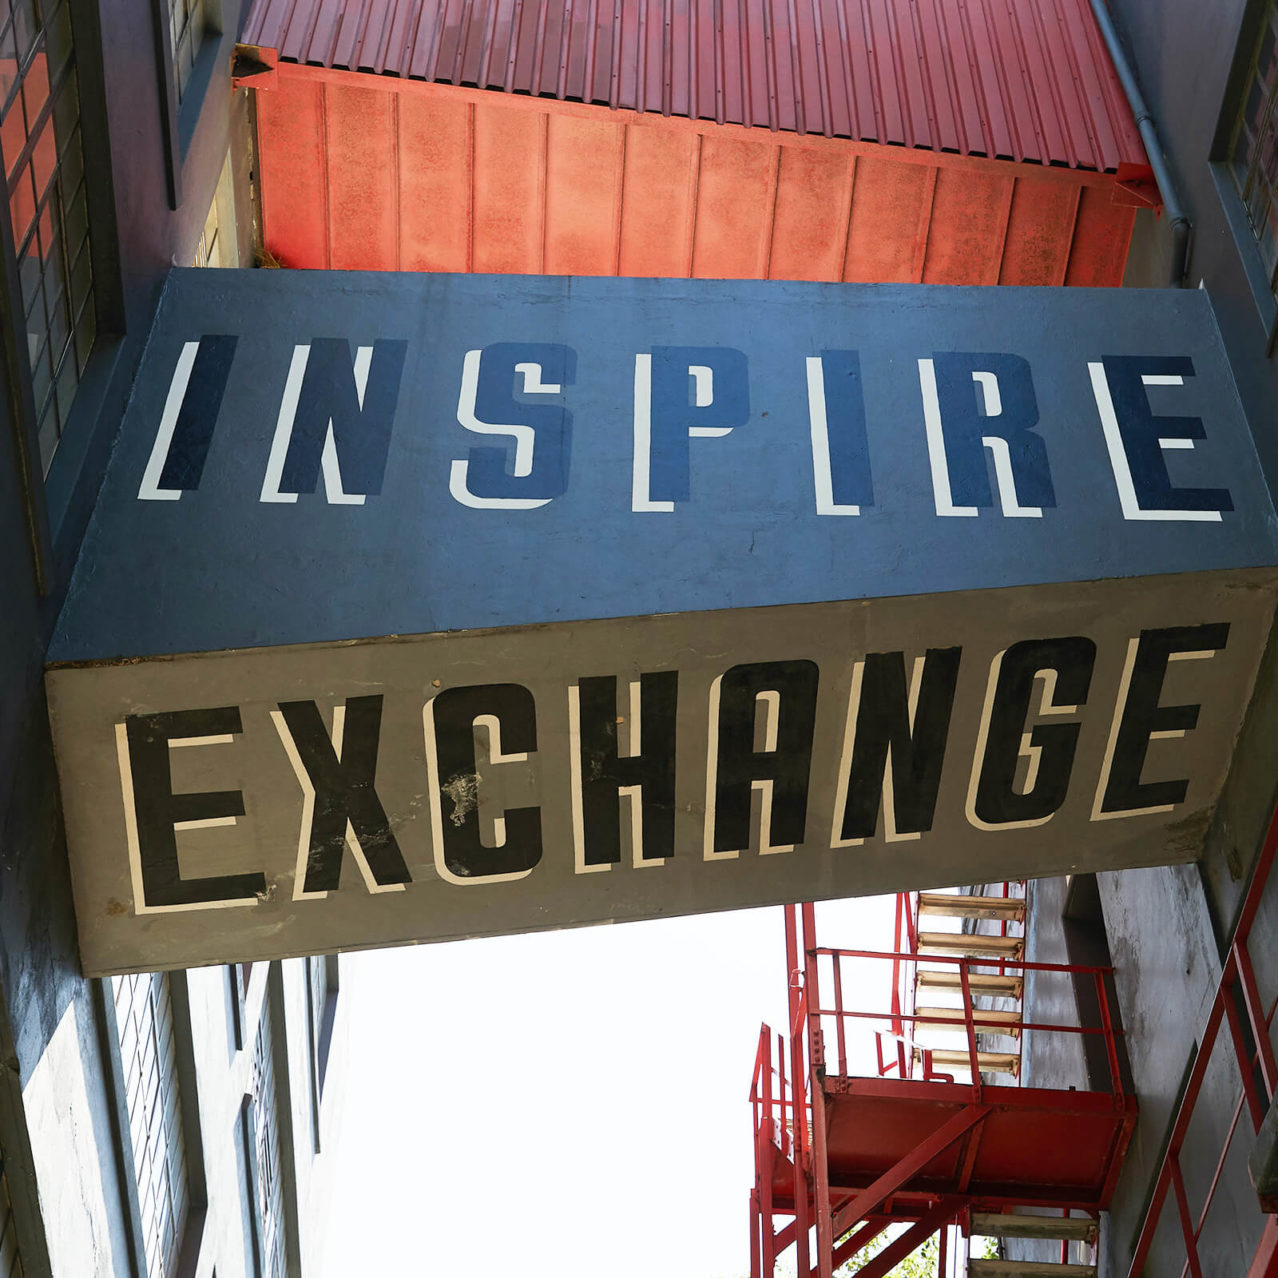 Inspire. Exchange. Typography painted onto an old warehouse style building.